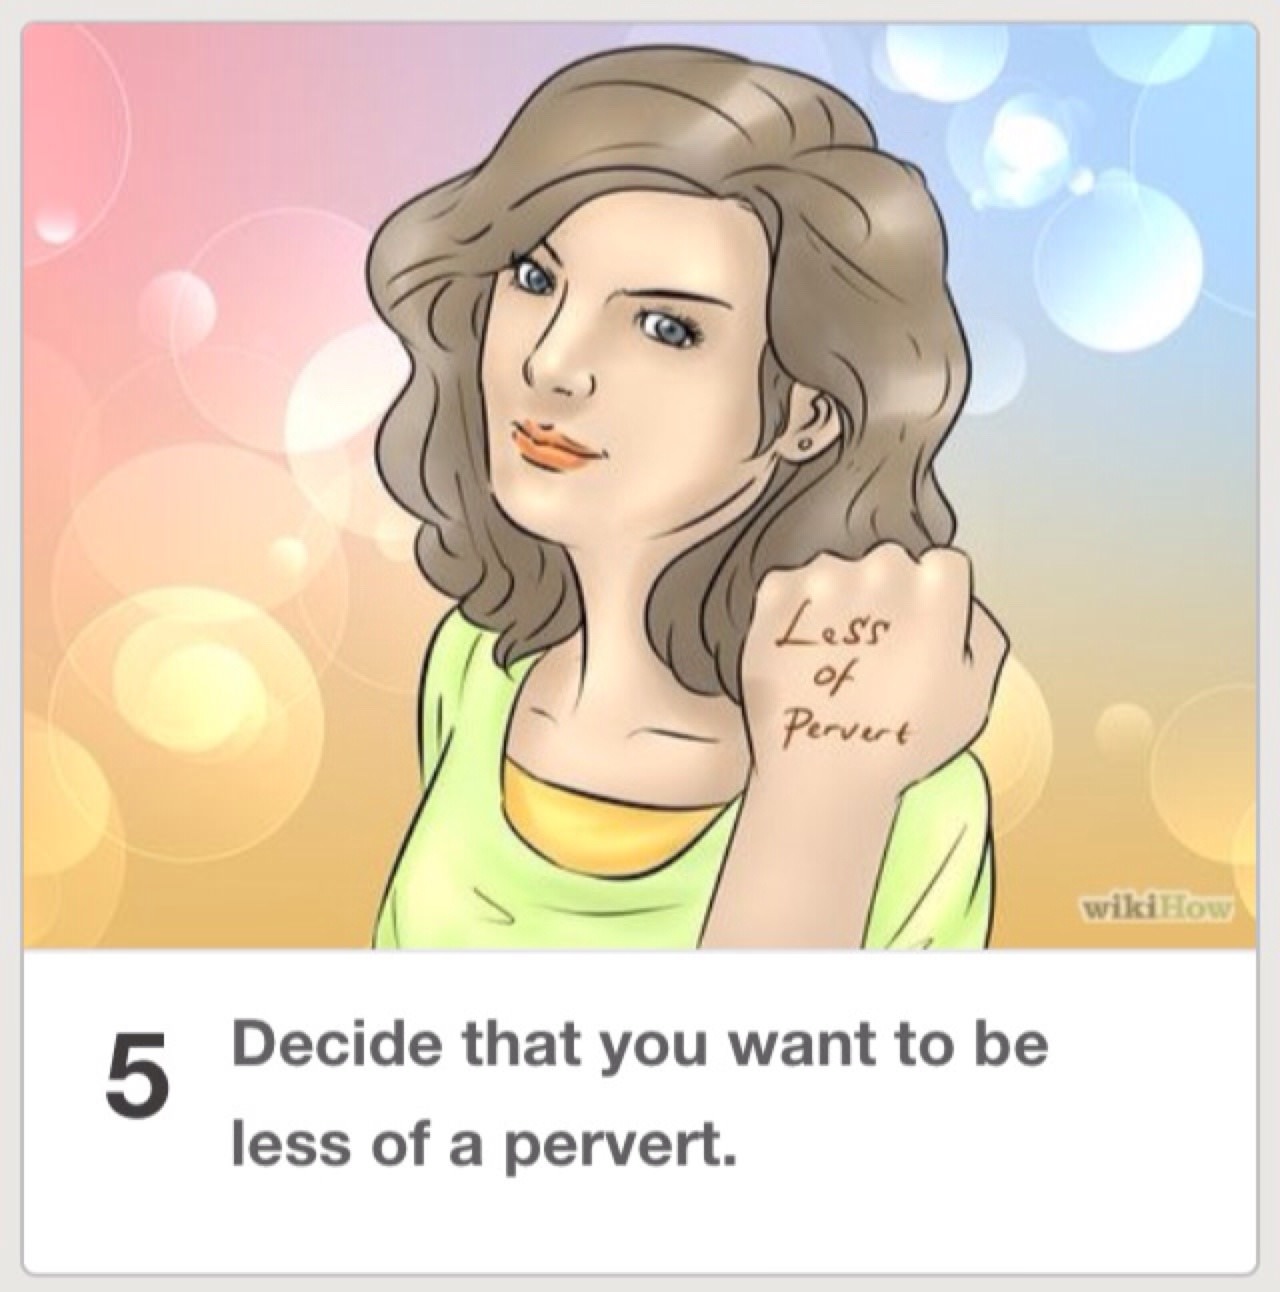 decide that you want to be less - Pervert wikiHow Decide that you want to be less of a pervert.